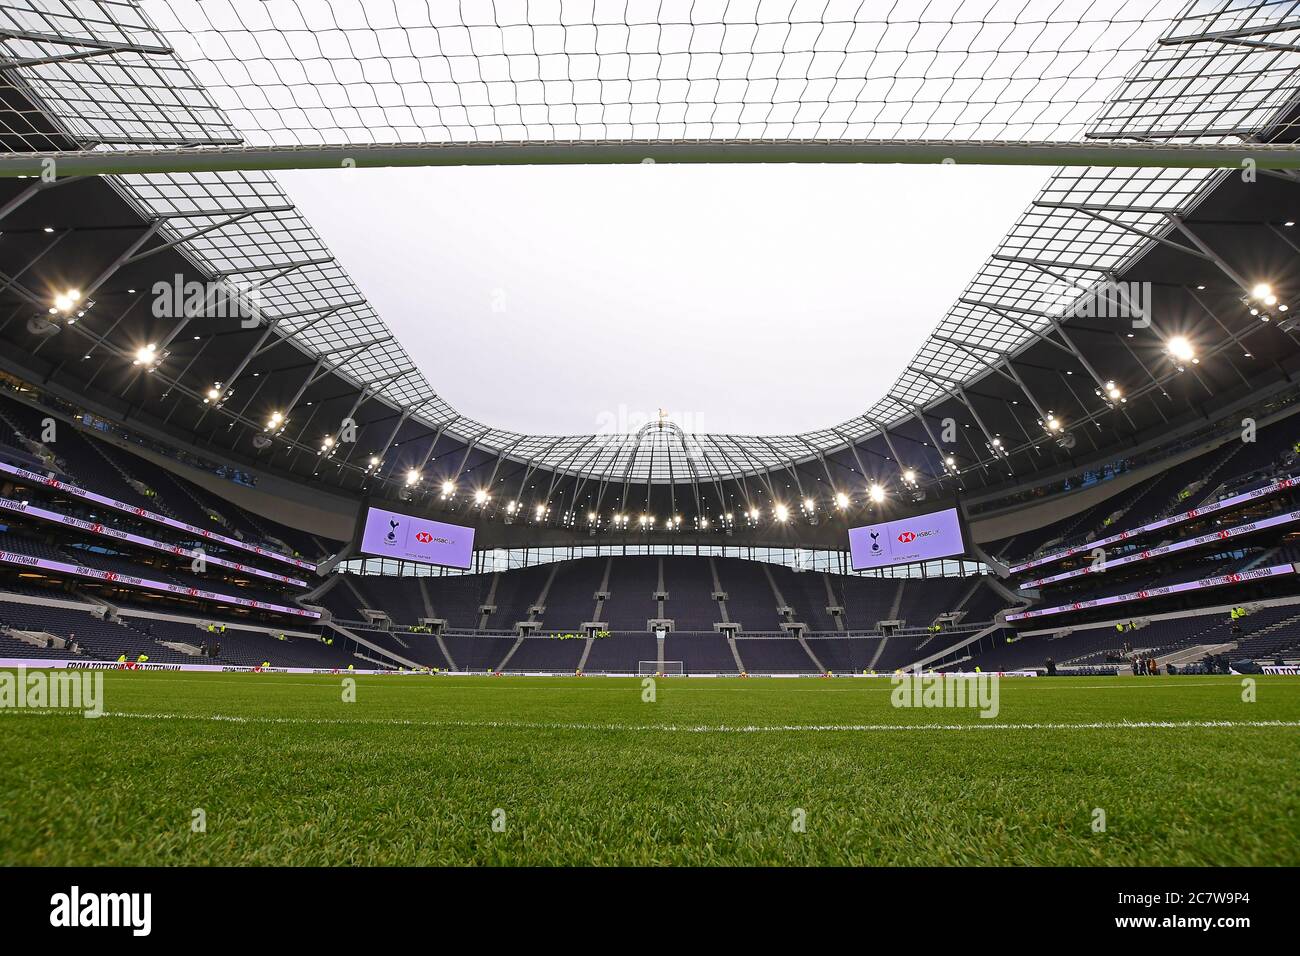 LONDON, ENGLAND - FEBRUARY 2, 2020: General view of the new Tottenham Hotspur Stadium pictured prior to the 2019/20 Premier League game between Tottenham Hotspur and Manchester City at Tottenham Hotspur Stadium. Stock Photo